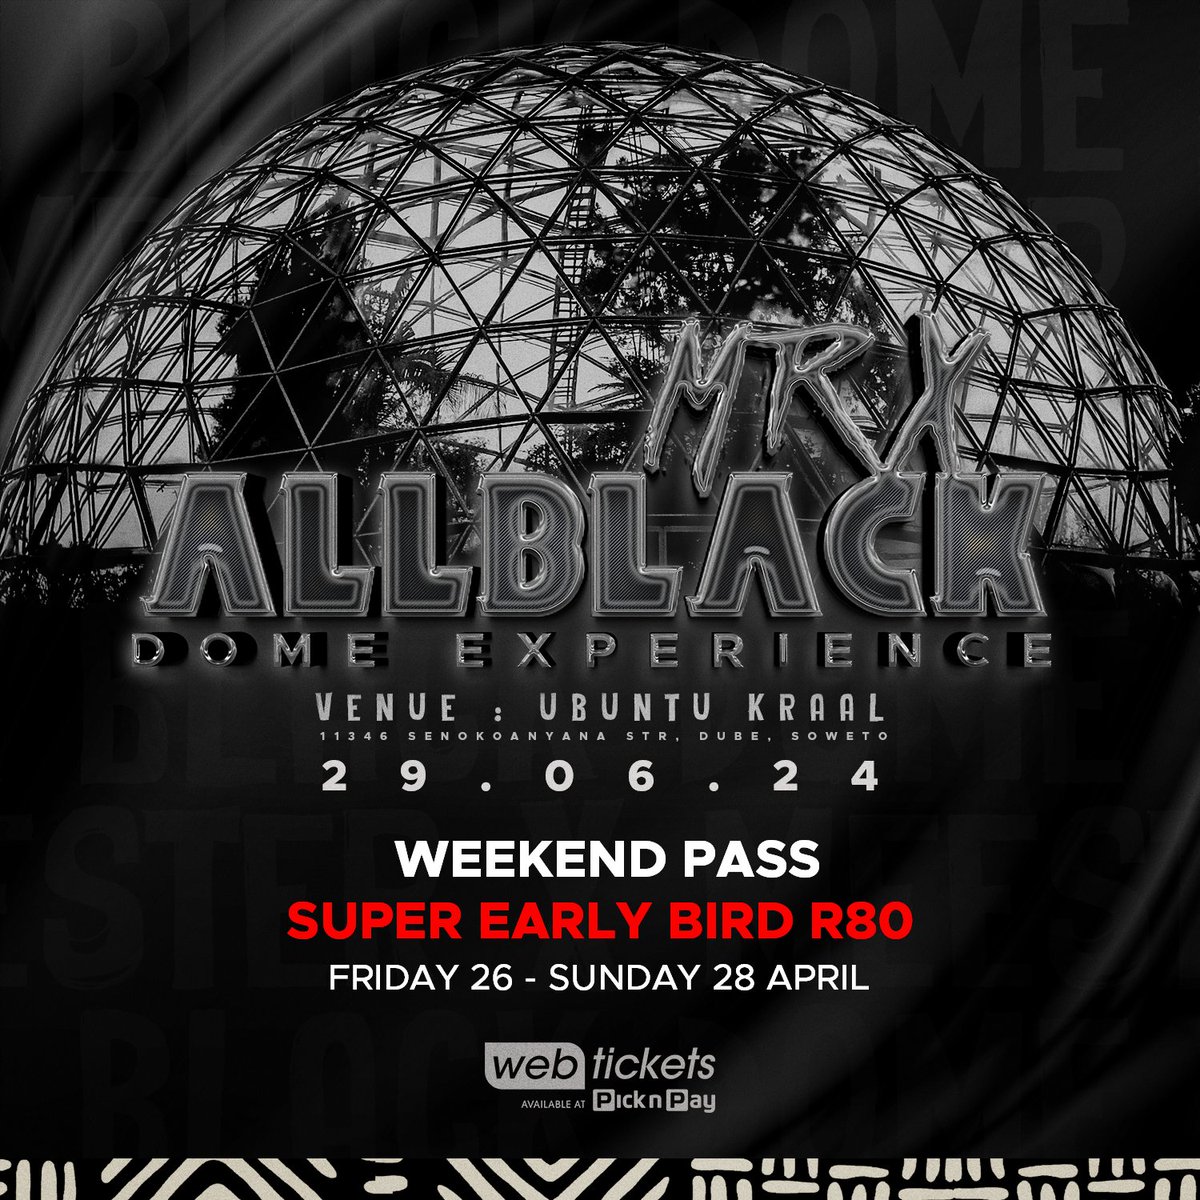 29 June is a big date for manyora, @deejay_mrx hosts us for the #MrXAllBlackDomeExperience 🥳 📍Ubuntu Kraal 🎟️ R80 gets you in if you buy your ticket between today and the 28th 😄 webtickets.co.za/v2/event.aspx?…